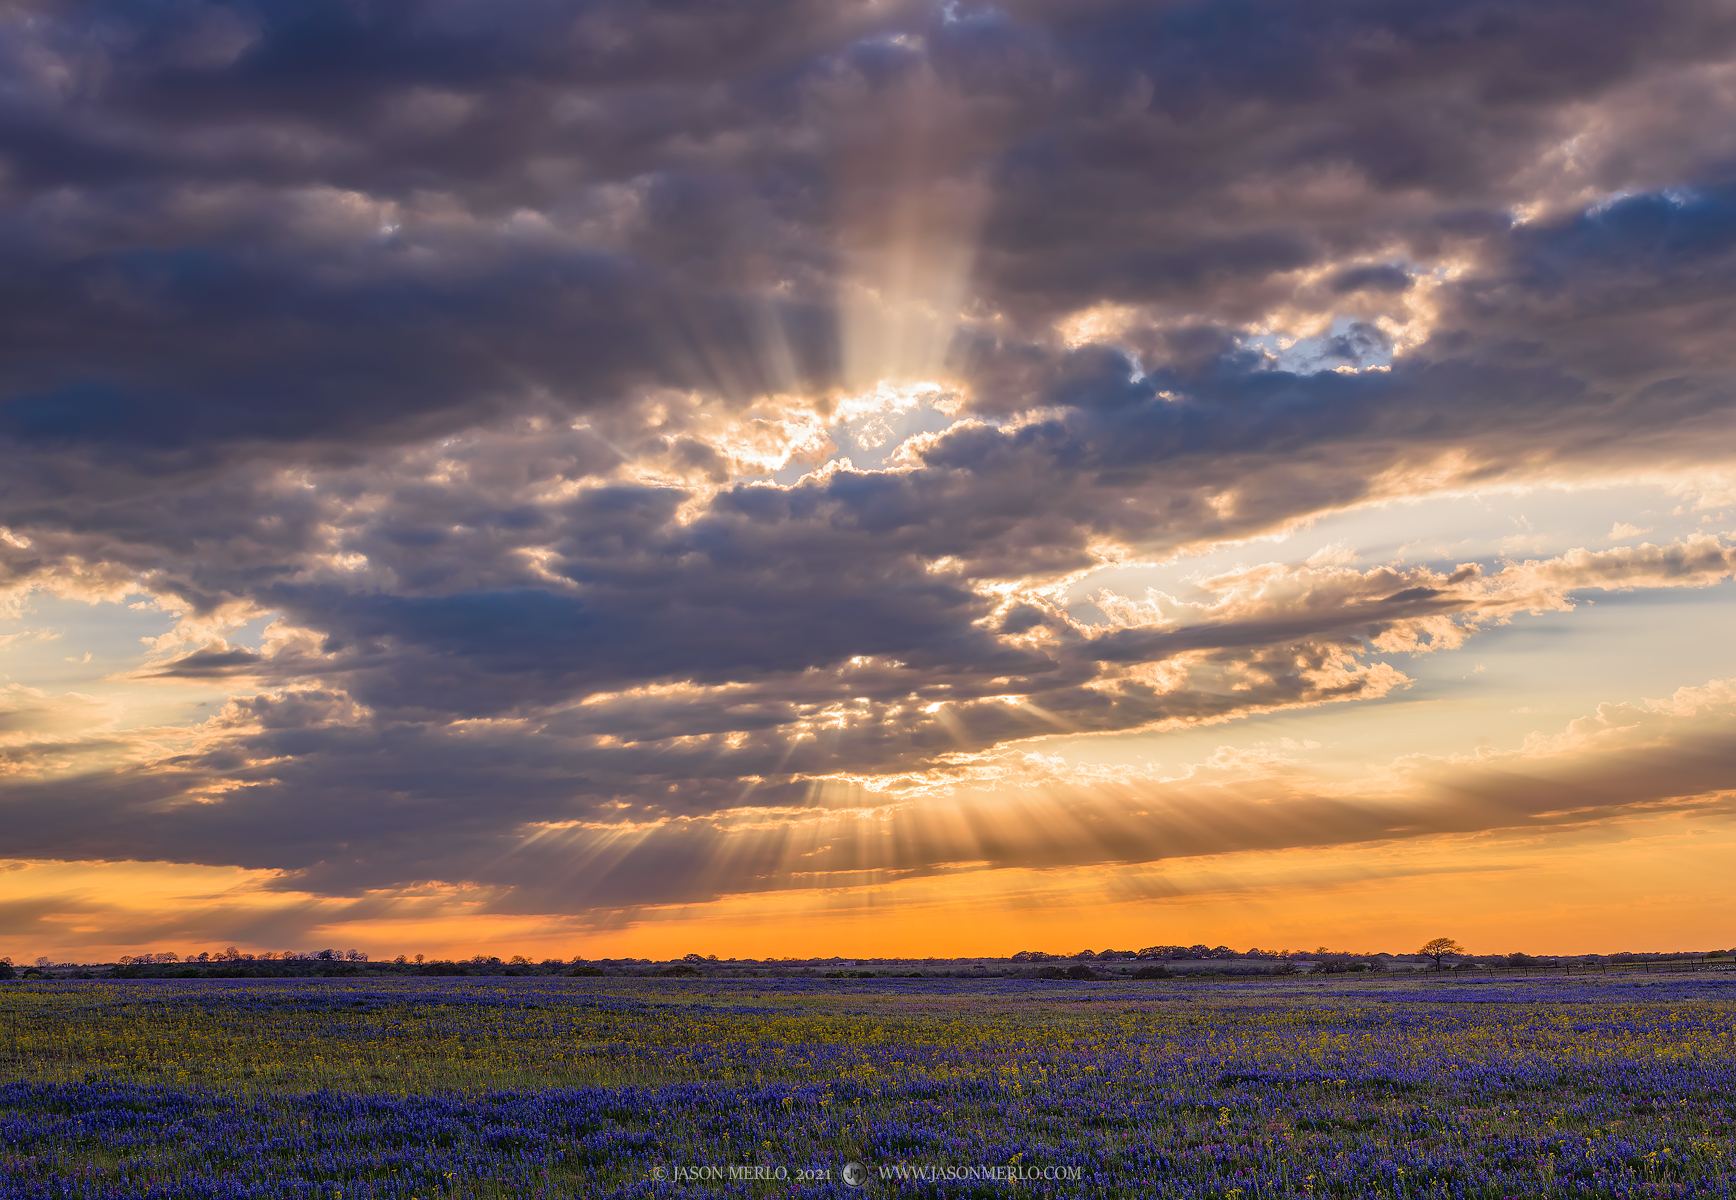 God rays over a field of sandyland bluebonnets (Lupinus subcarnosus), groundsel (Senecio ampullaceus), and other wildflowers...